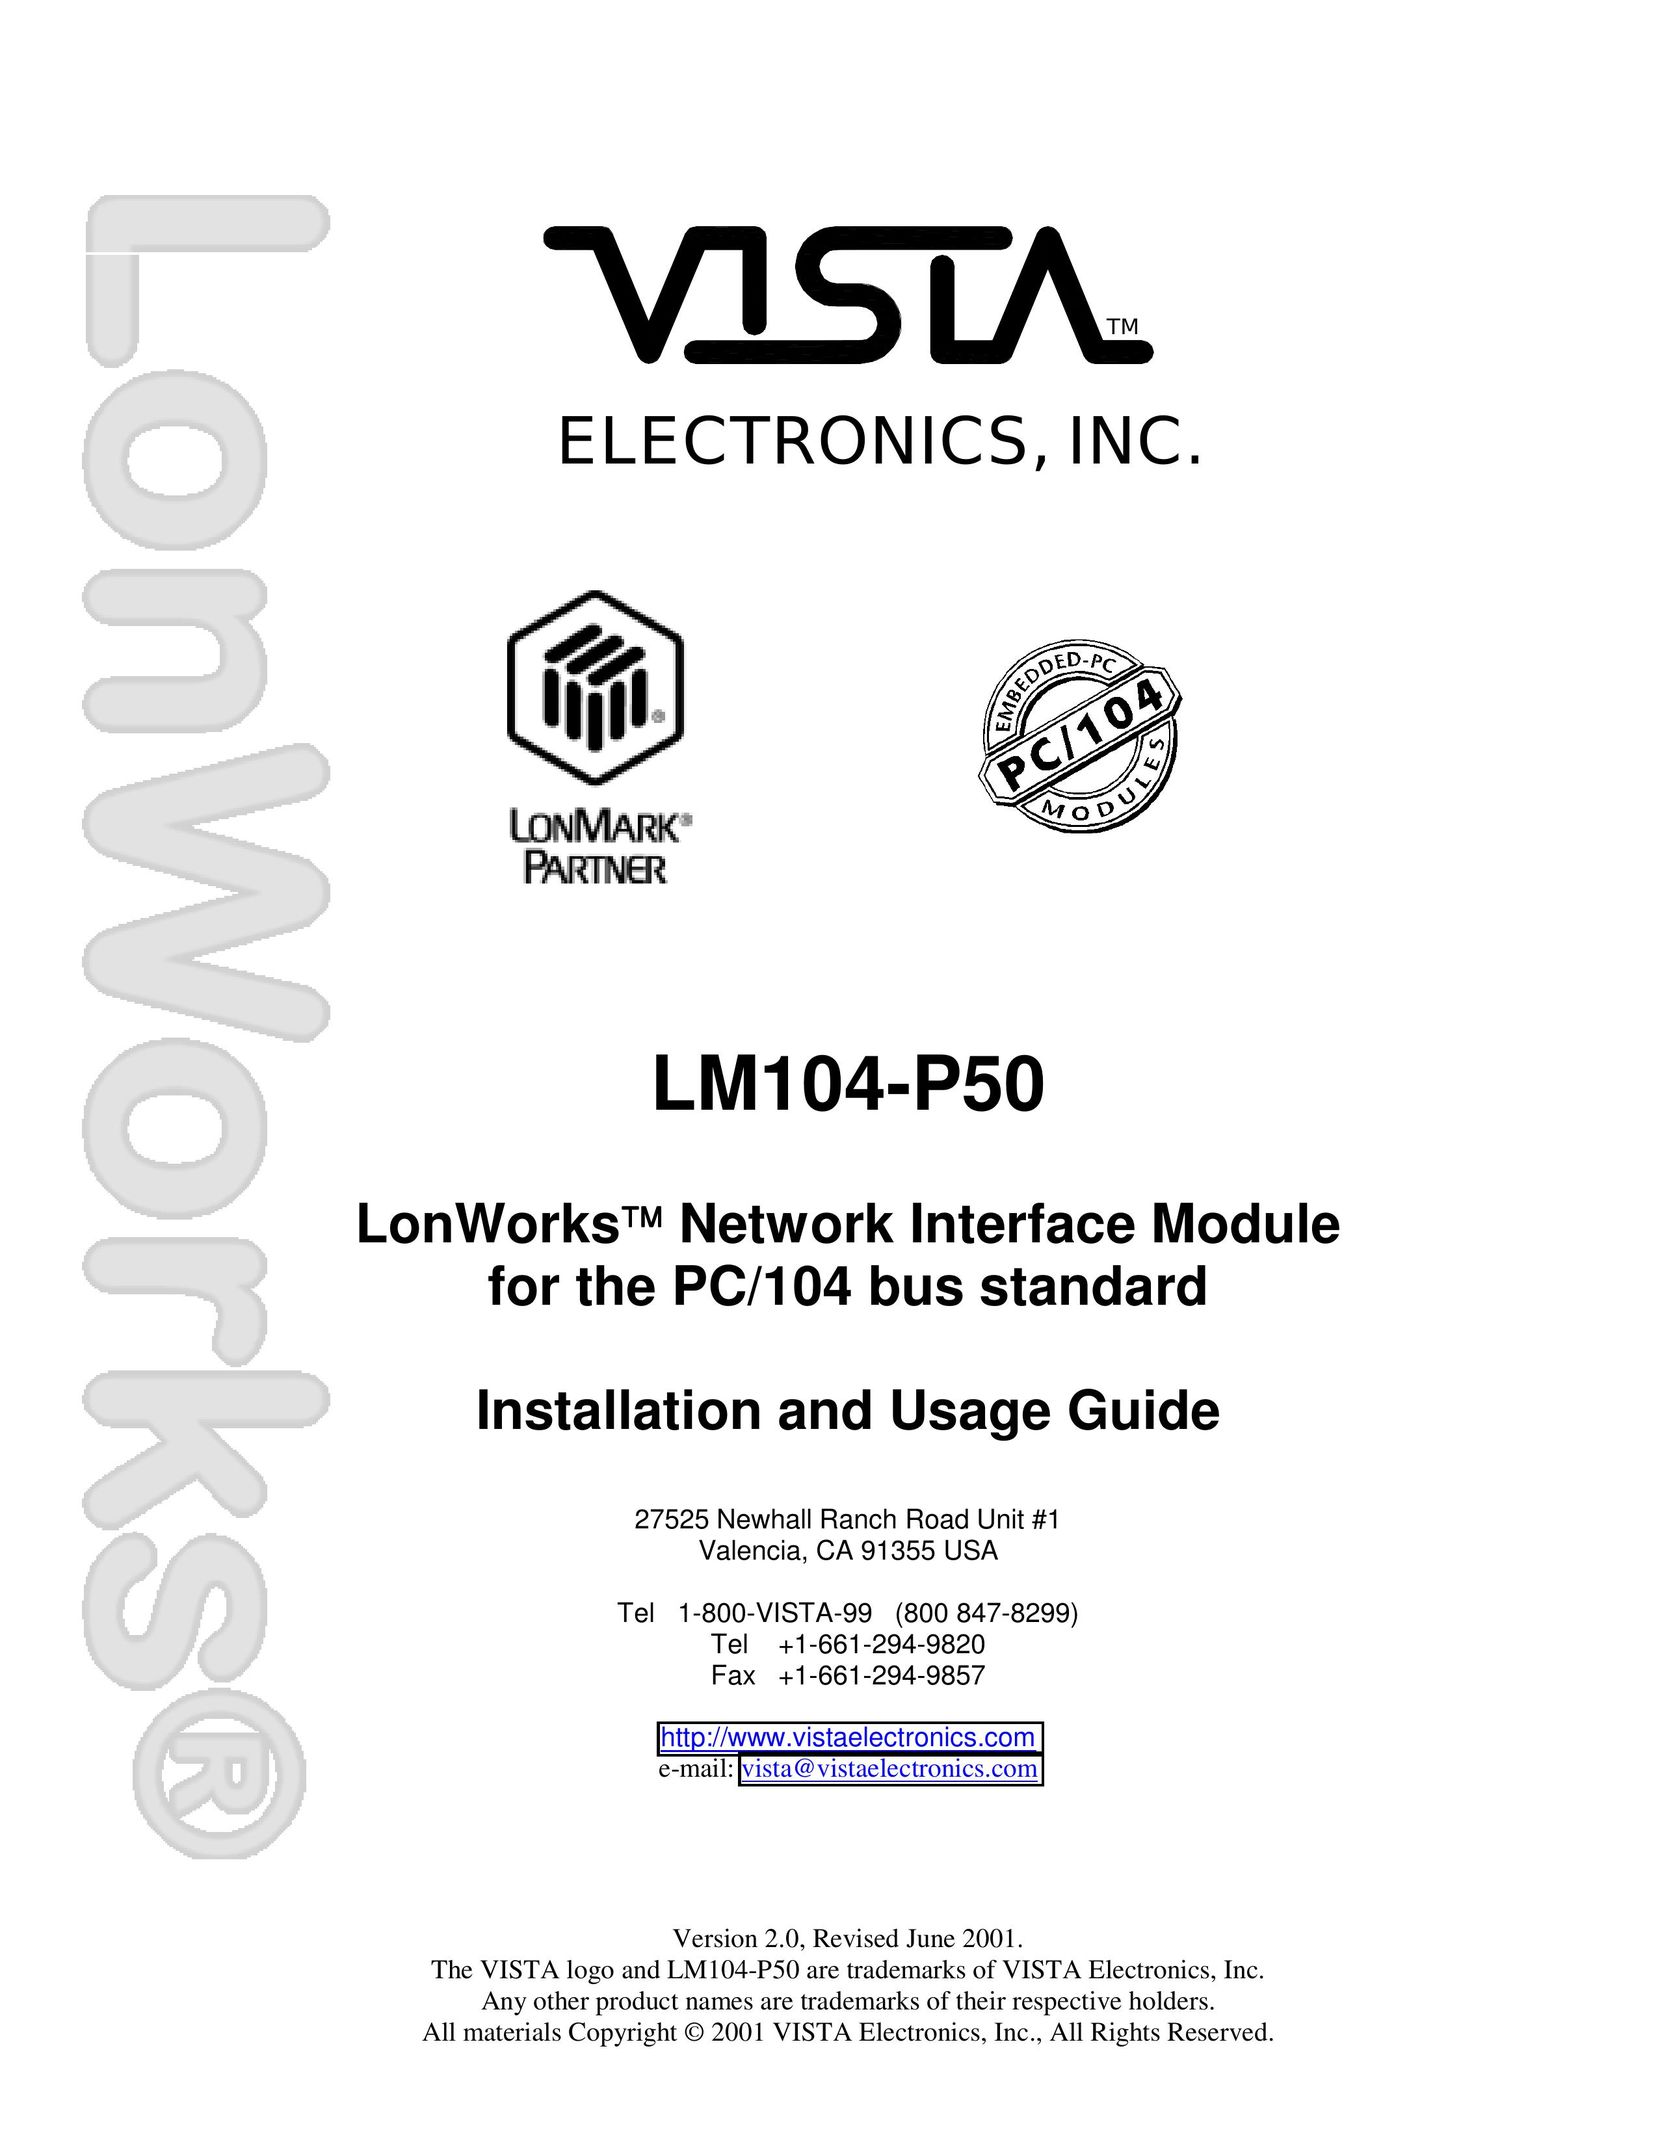 Vista LM104-P50 Network Router User Manual